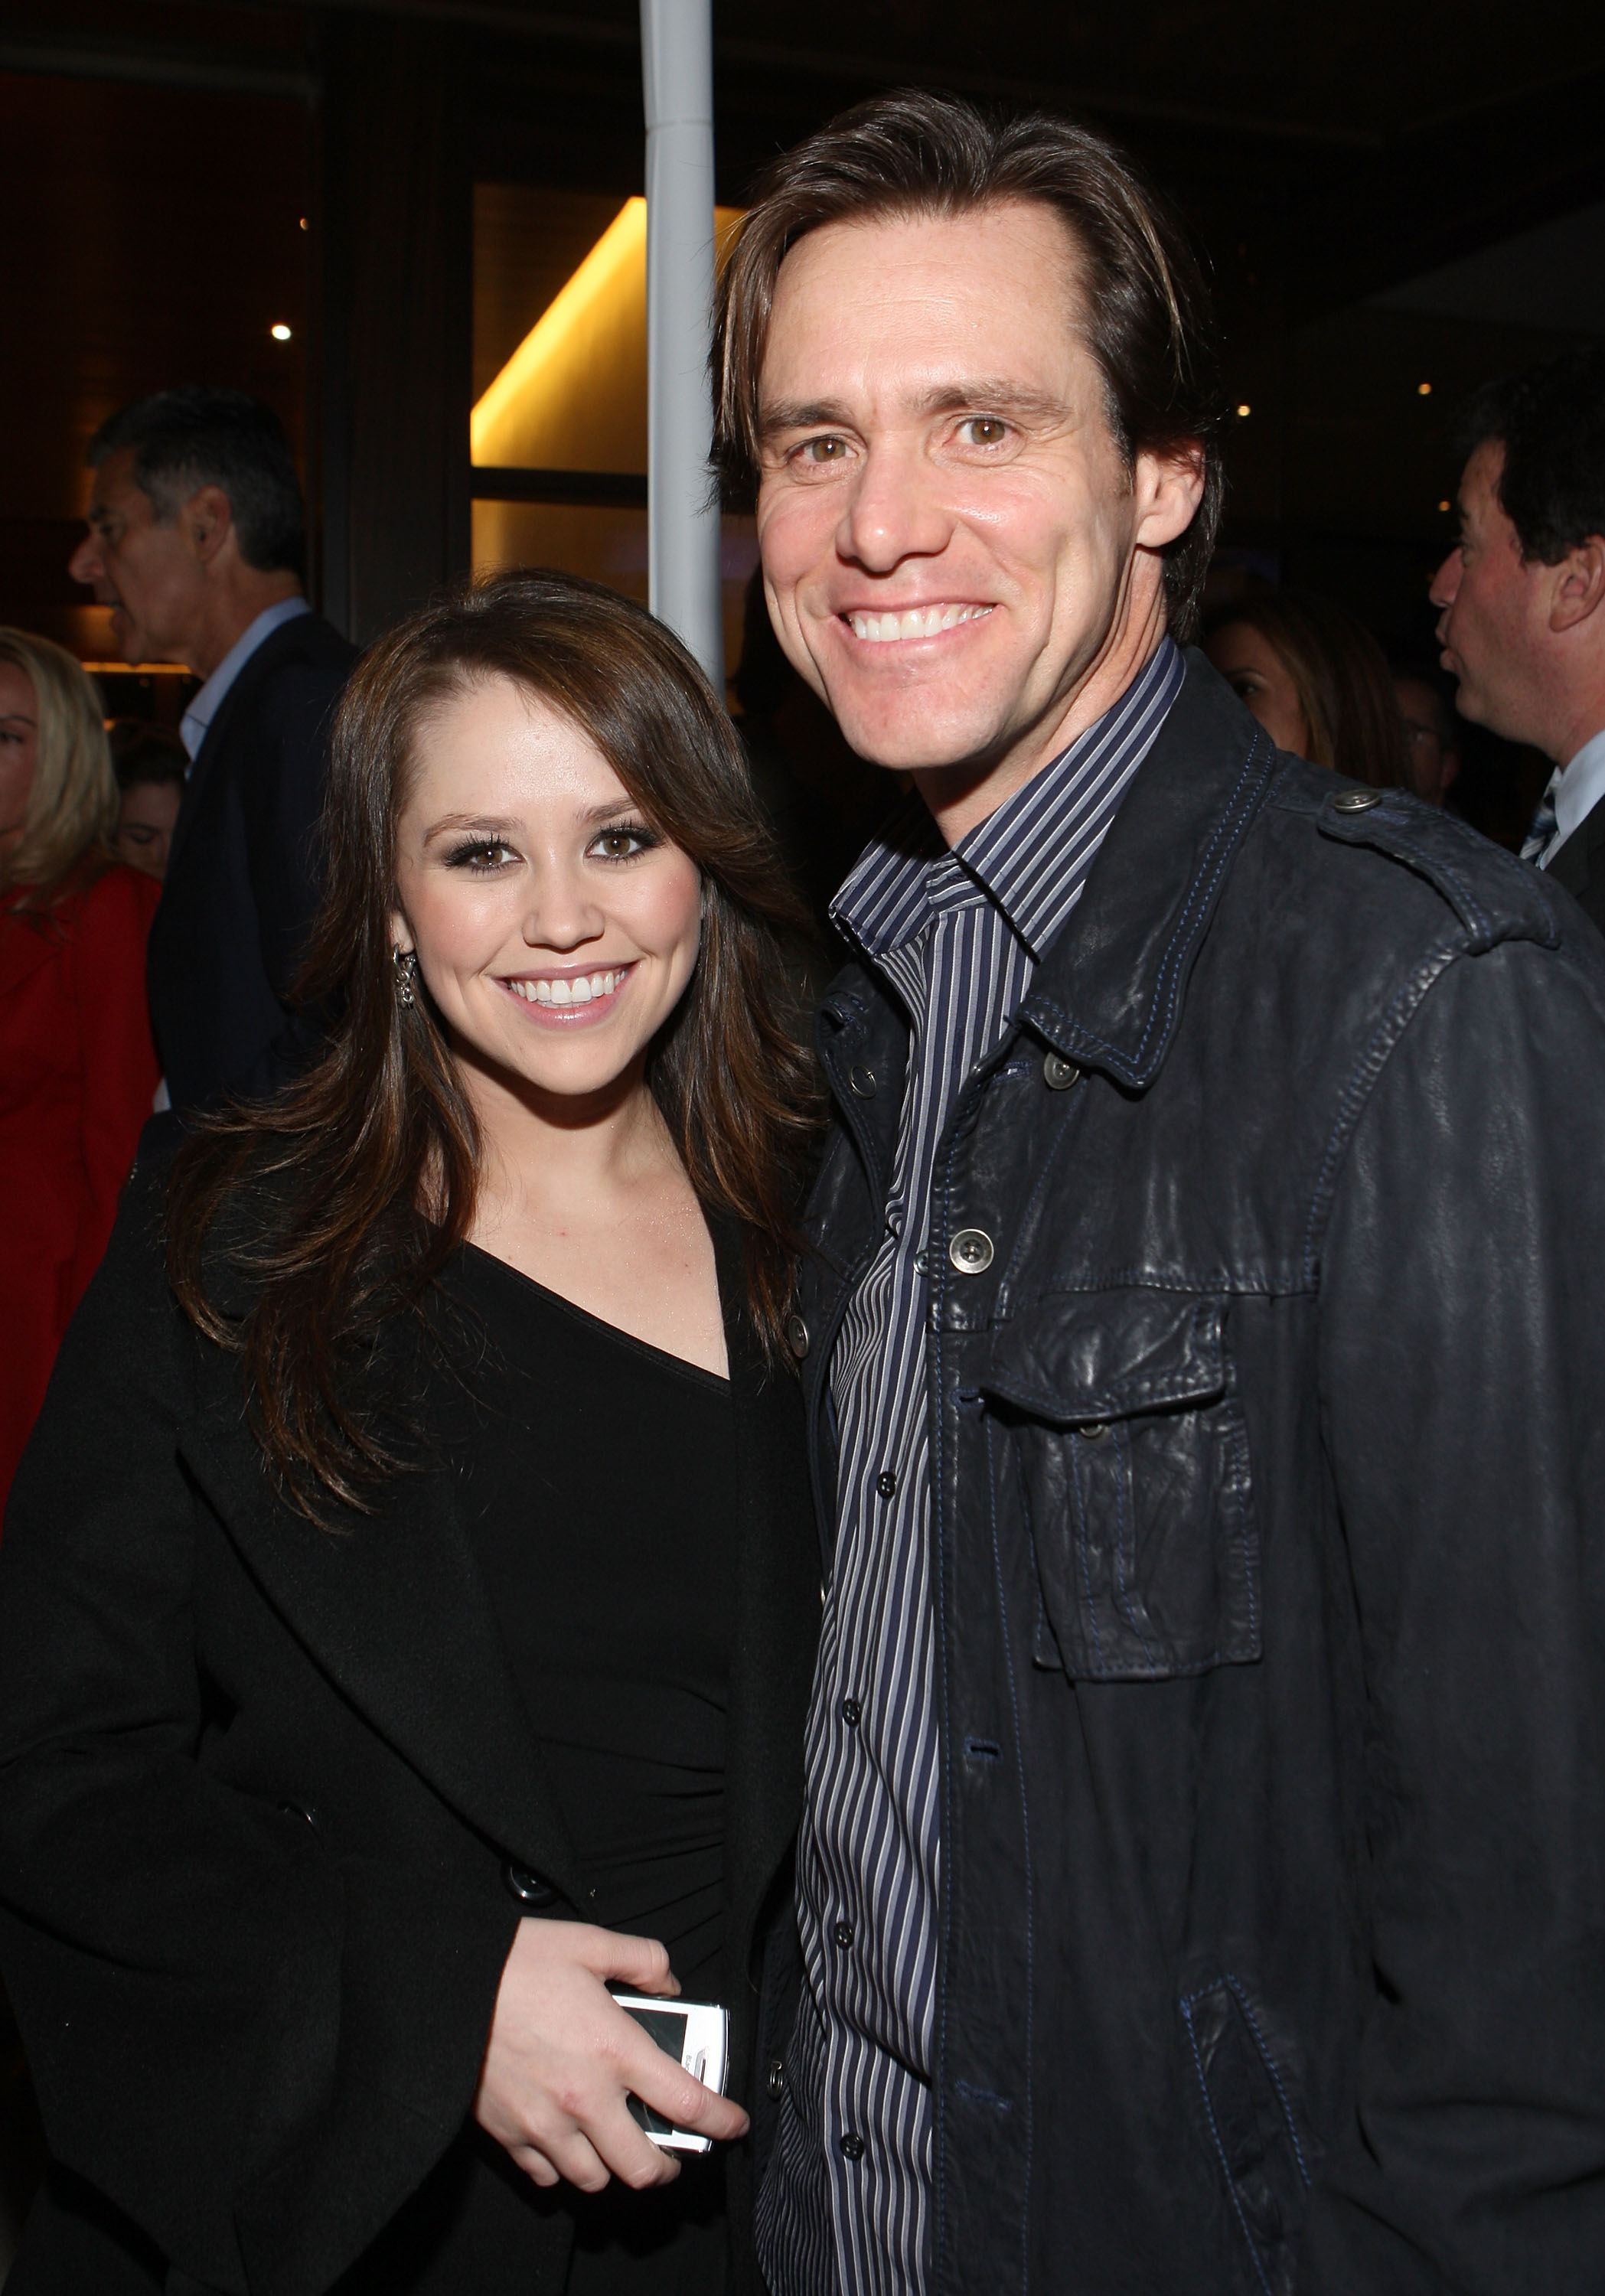 Jane and Jim Carrey at a cocktail party for the UCLA Early Childhood Partial Hospitalization Program in Pacific Palisades, California on October 11, 2007 | Source: Getty Images